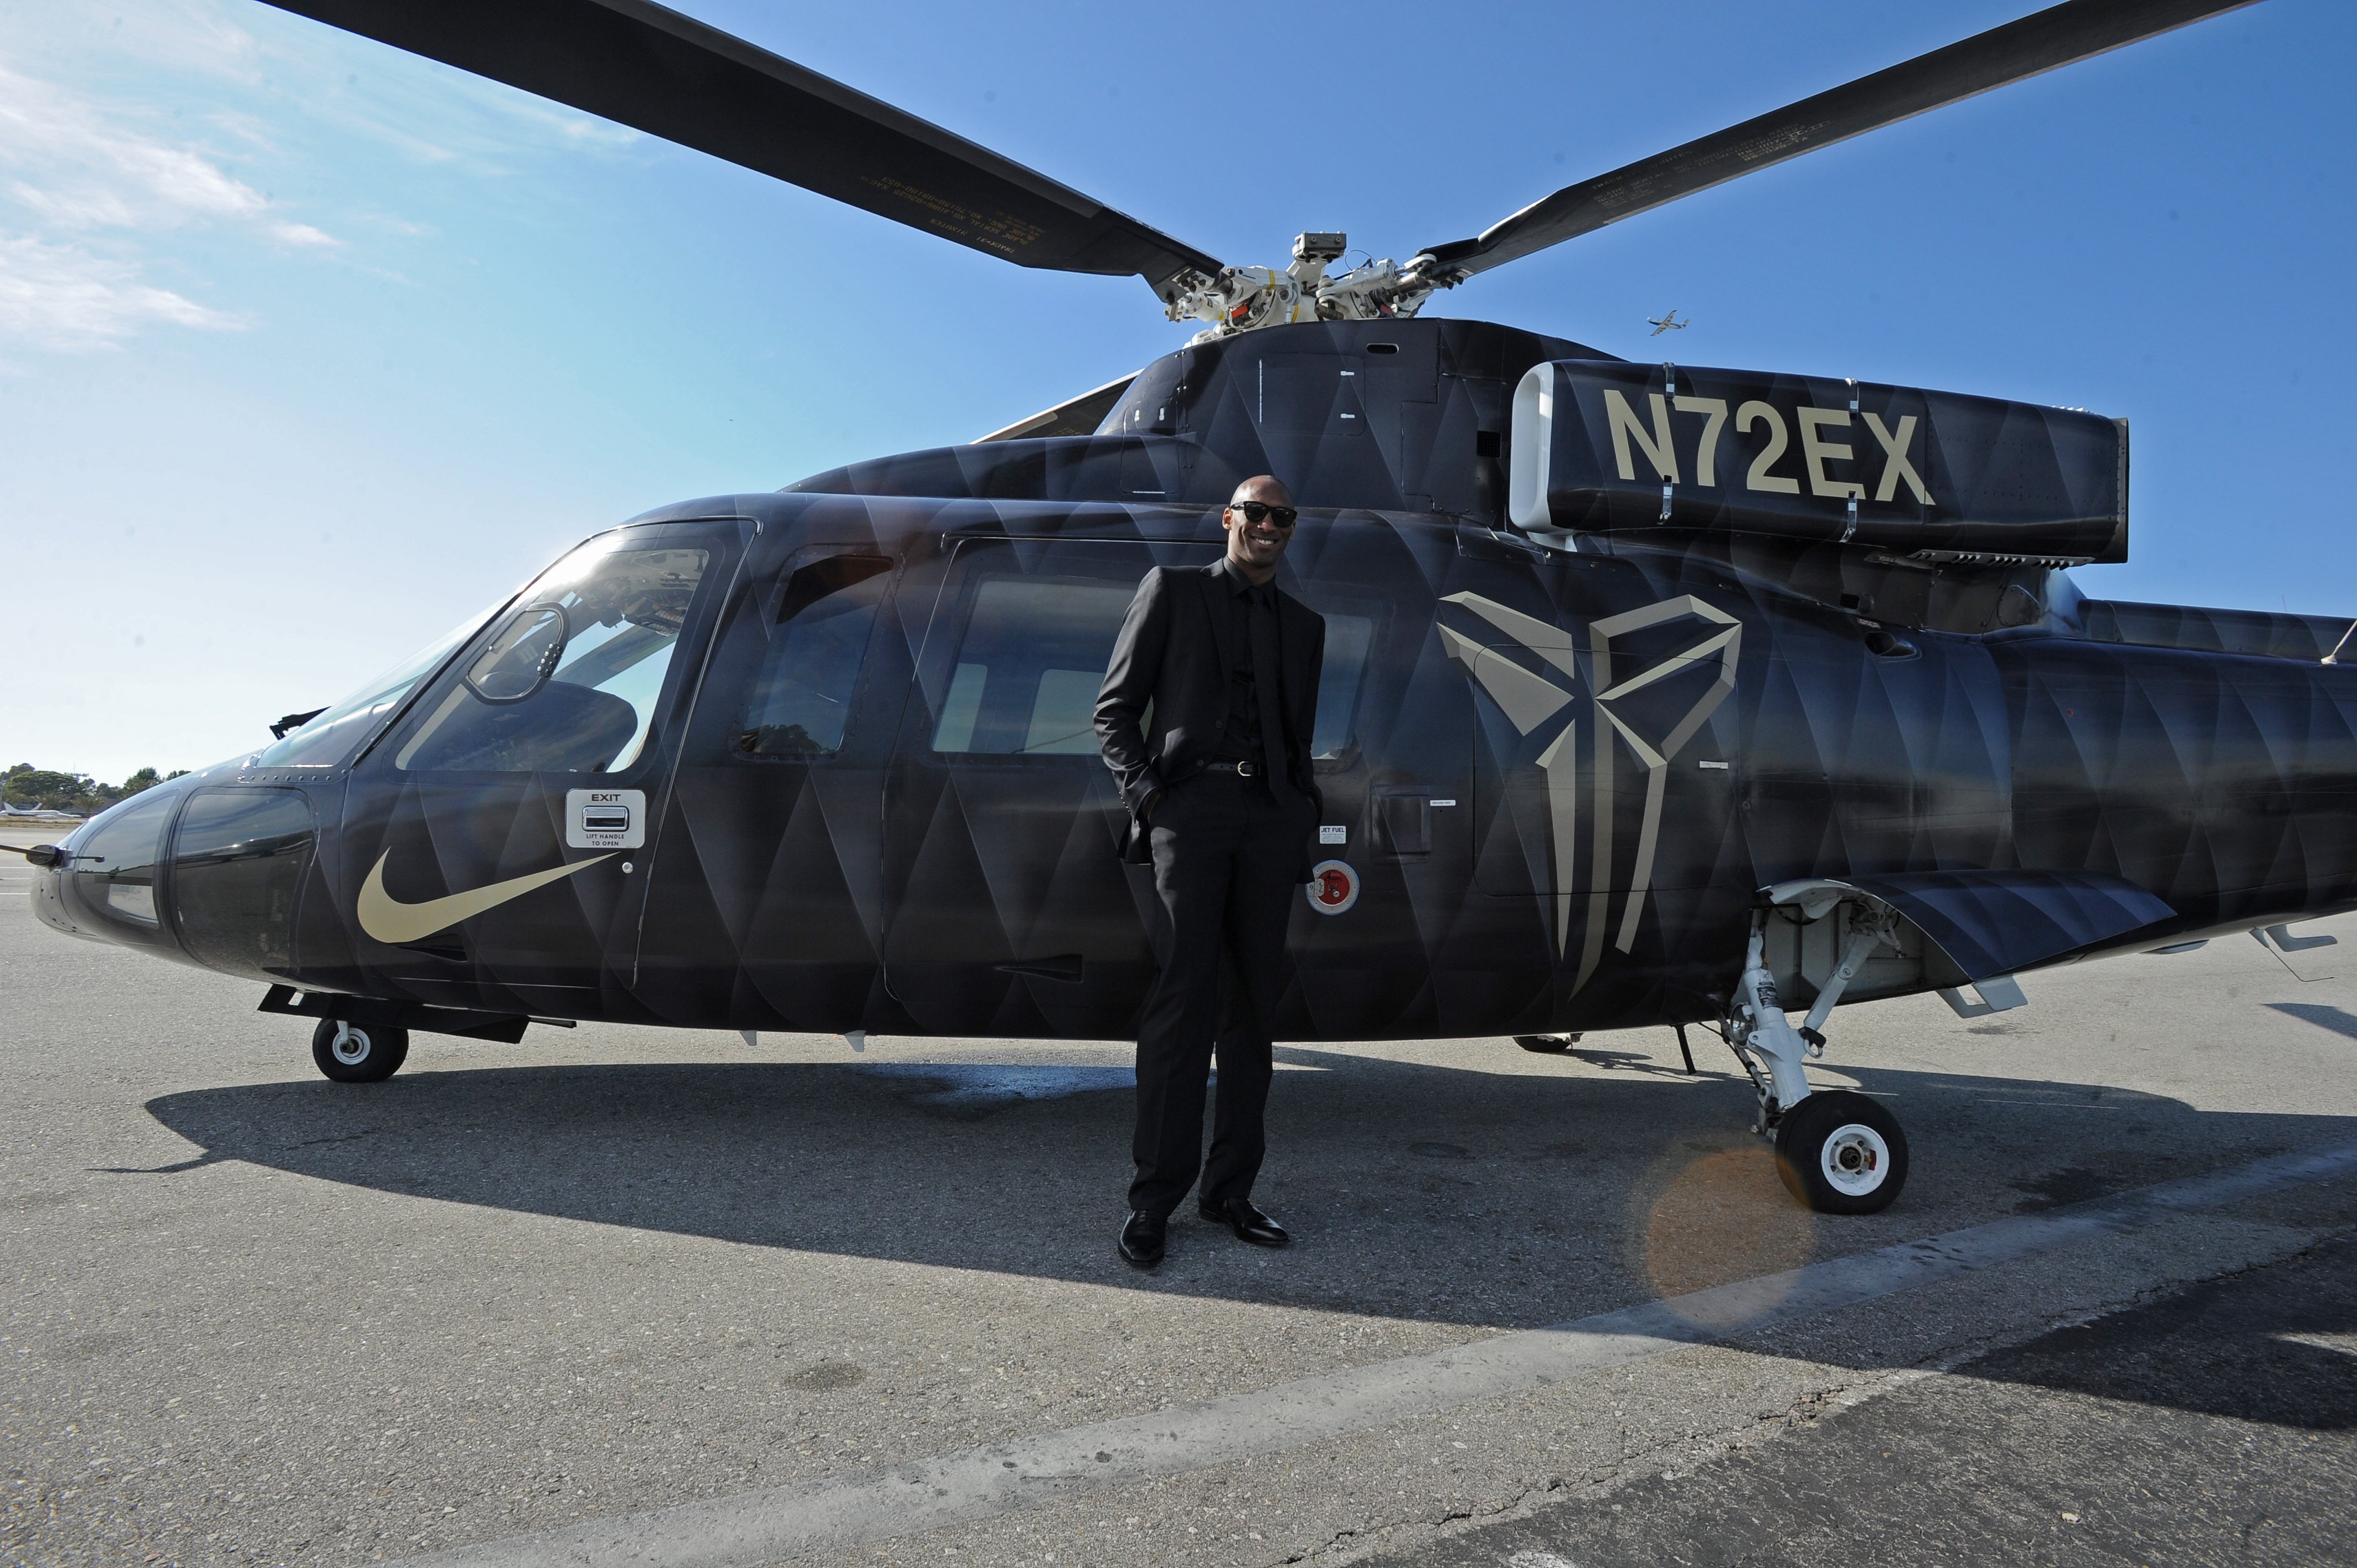 Kobe Bryant #24 of the Los Angeles Lakers poses for a photo in front of the helicopter he took to his last game against the Utah Jazz on April 13, 2016, at Staples Center in Los Angeles, California. | Source: Getty Images.